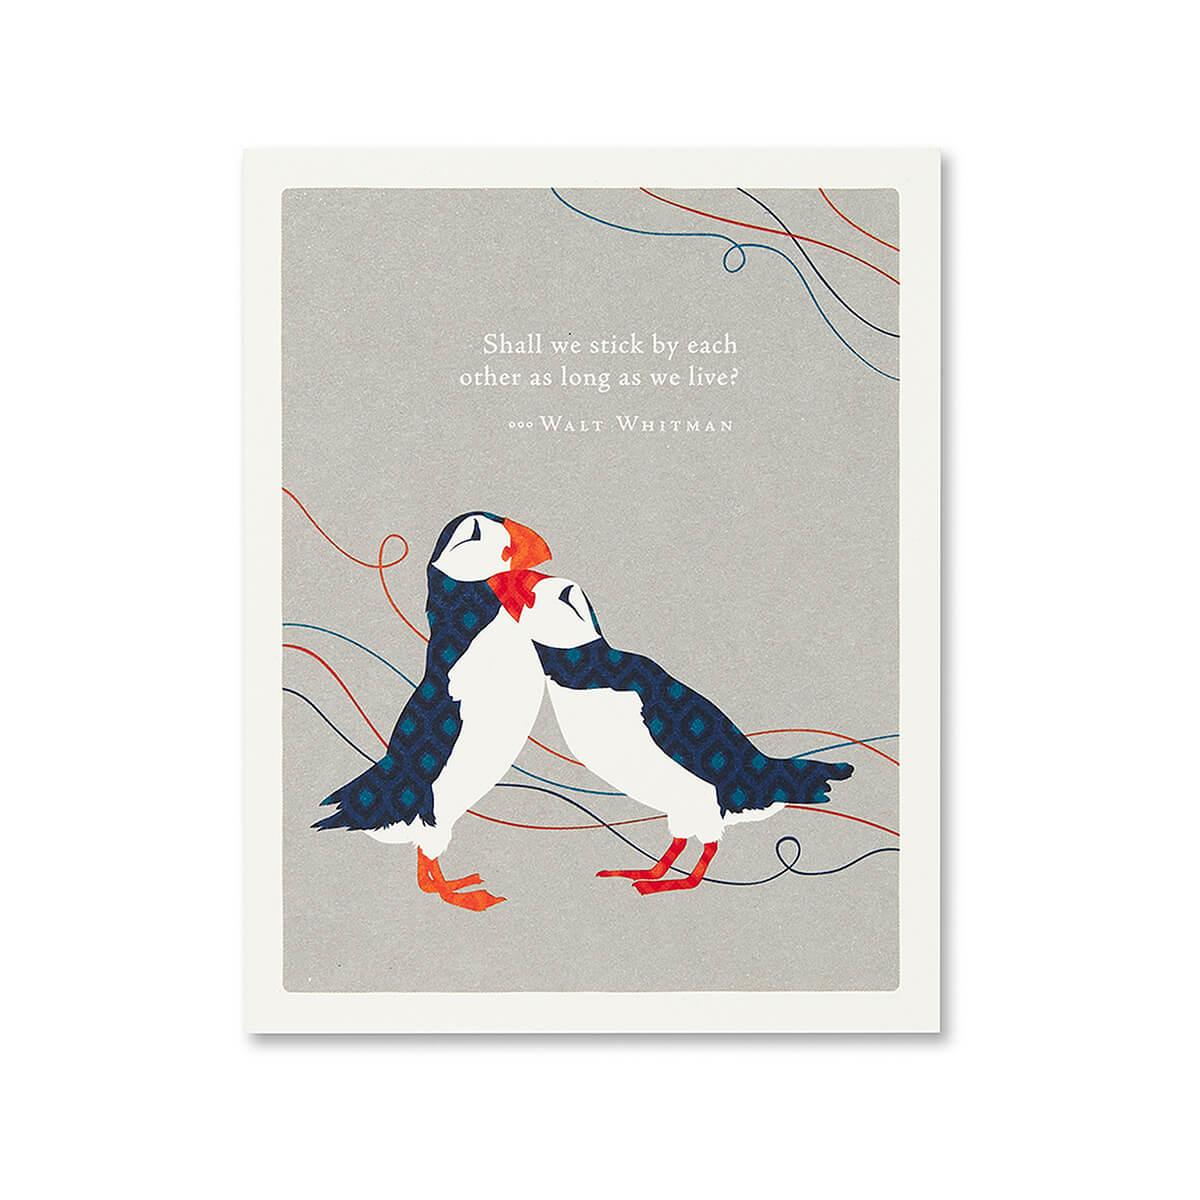  Stick By Each Other Anniversary Card